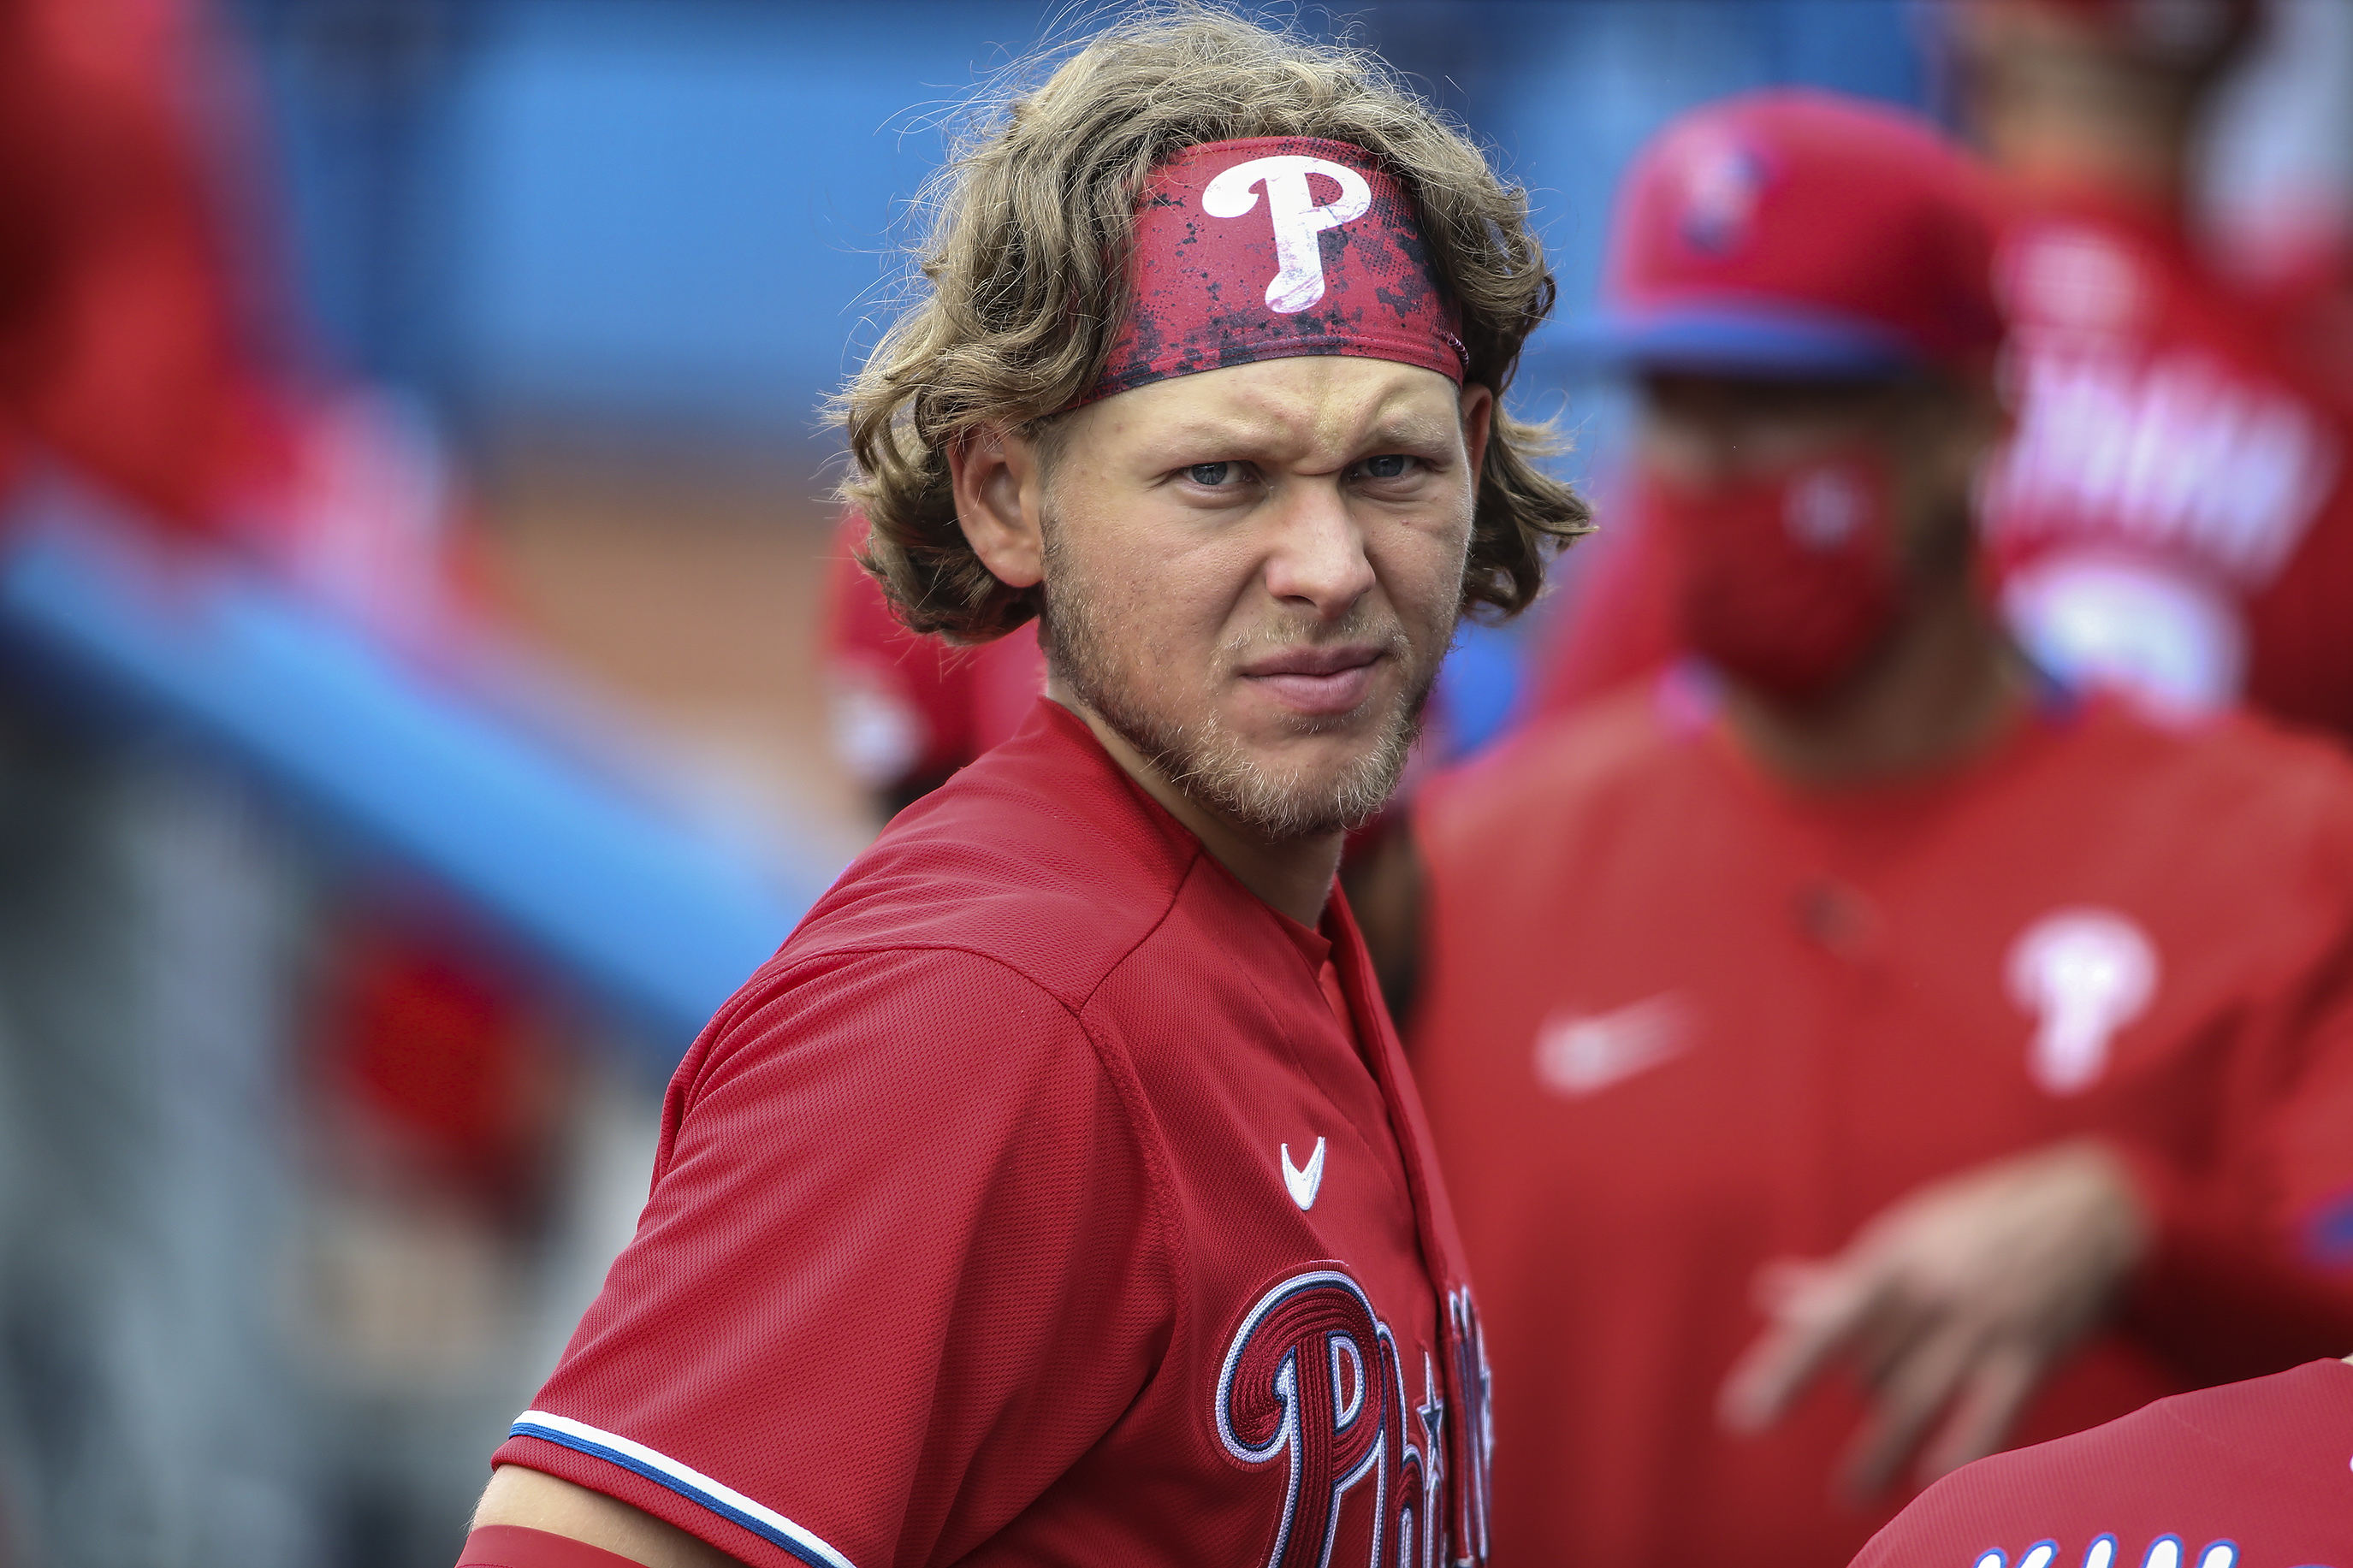 Phillies 13, Yankees 12: Alec Bohm leaves game with injury scare